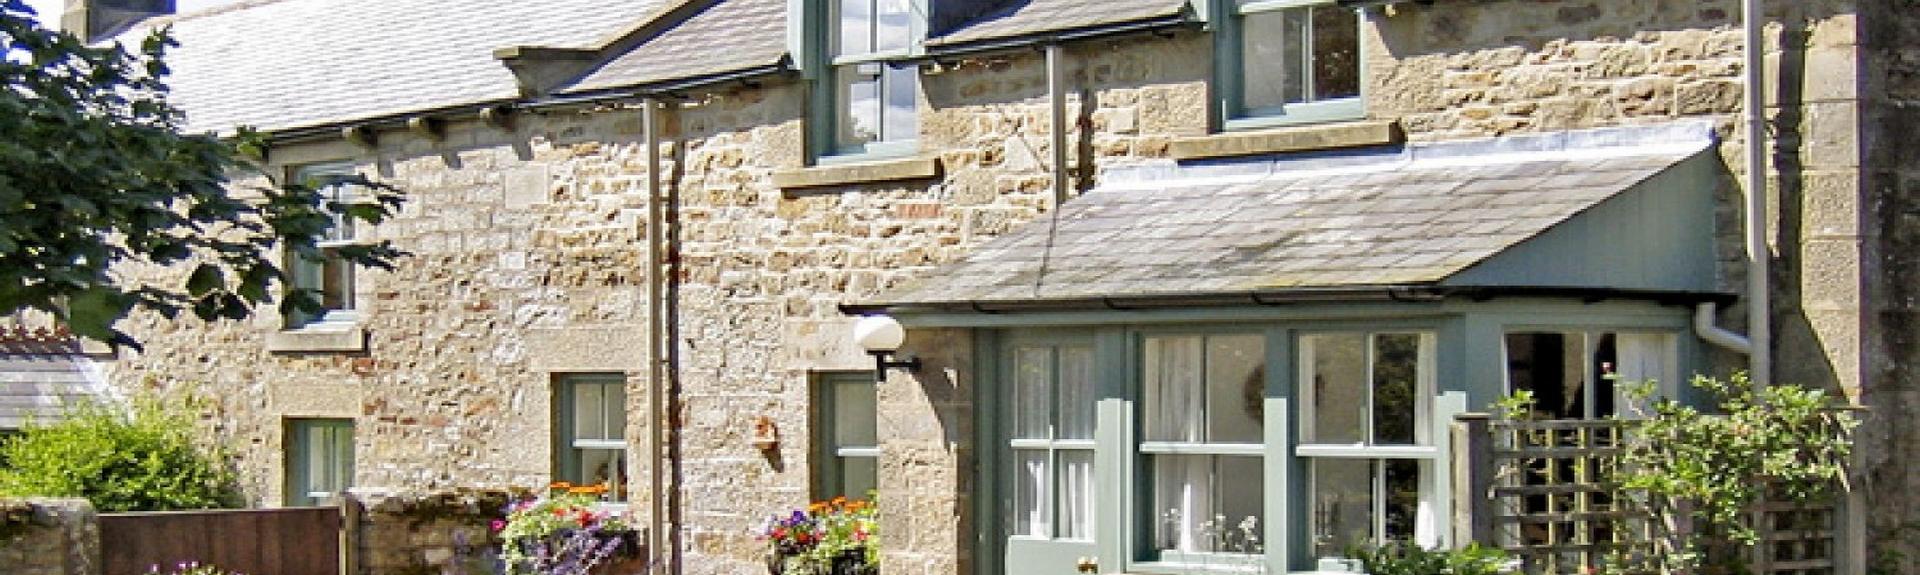 Exterior of a 2-storey stone-built Northumberland cottage.